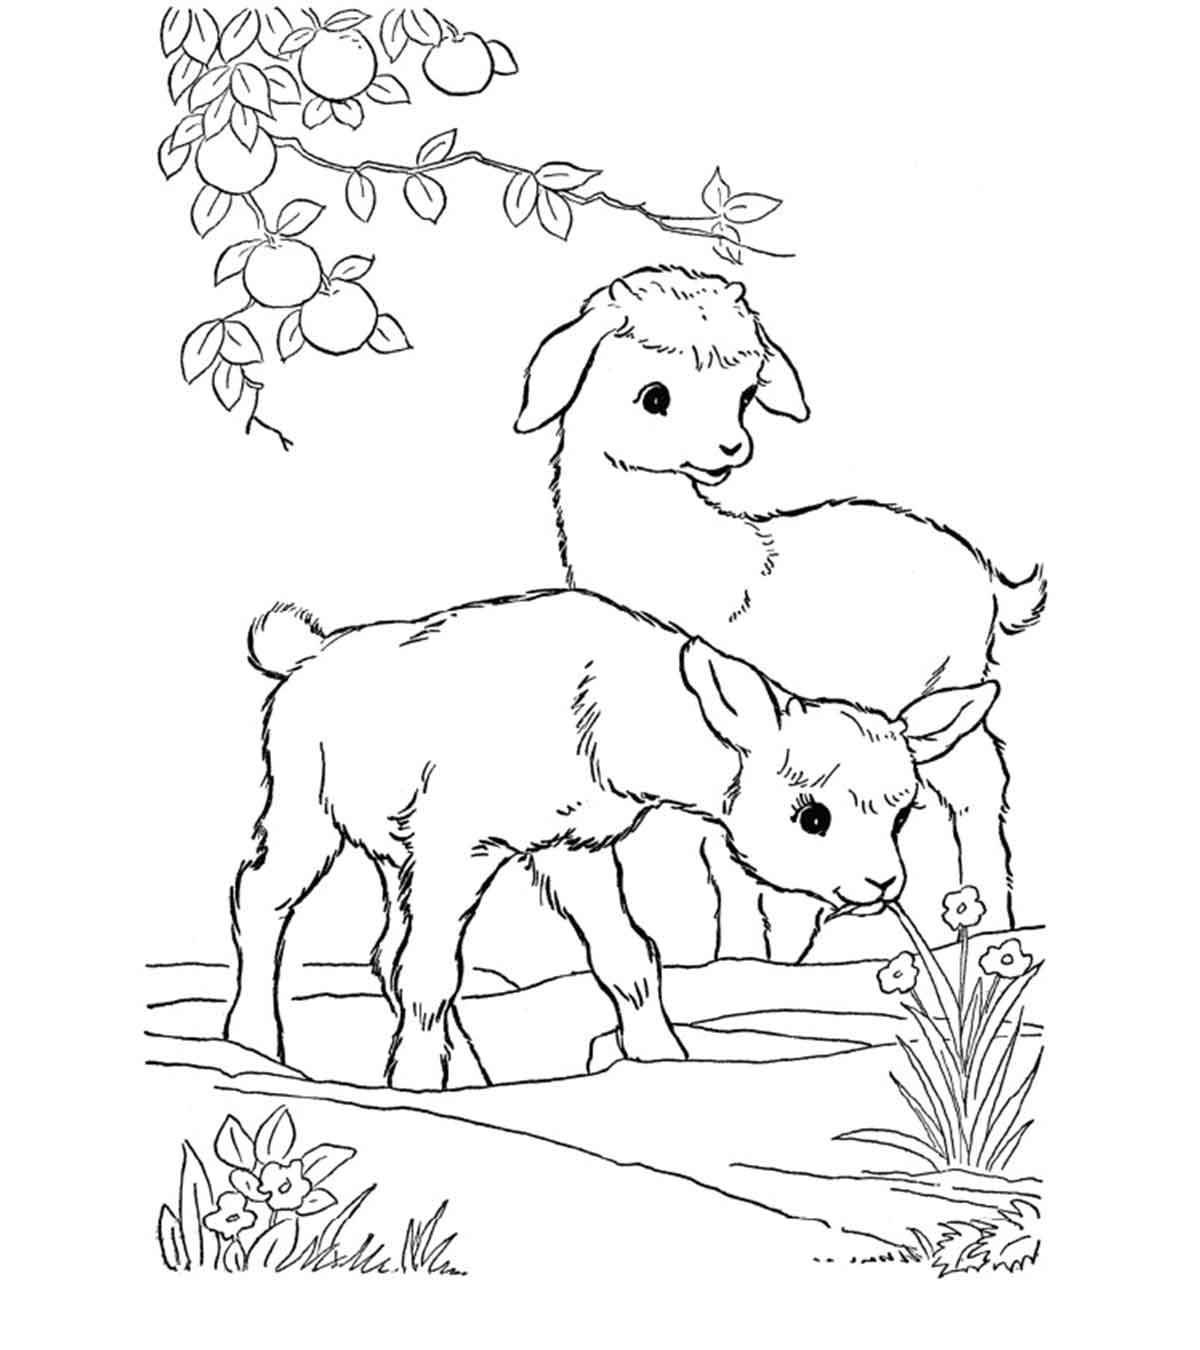 Fun coloring book pets for children 5-7 years old